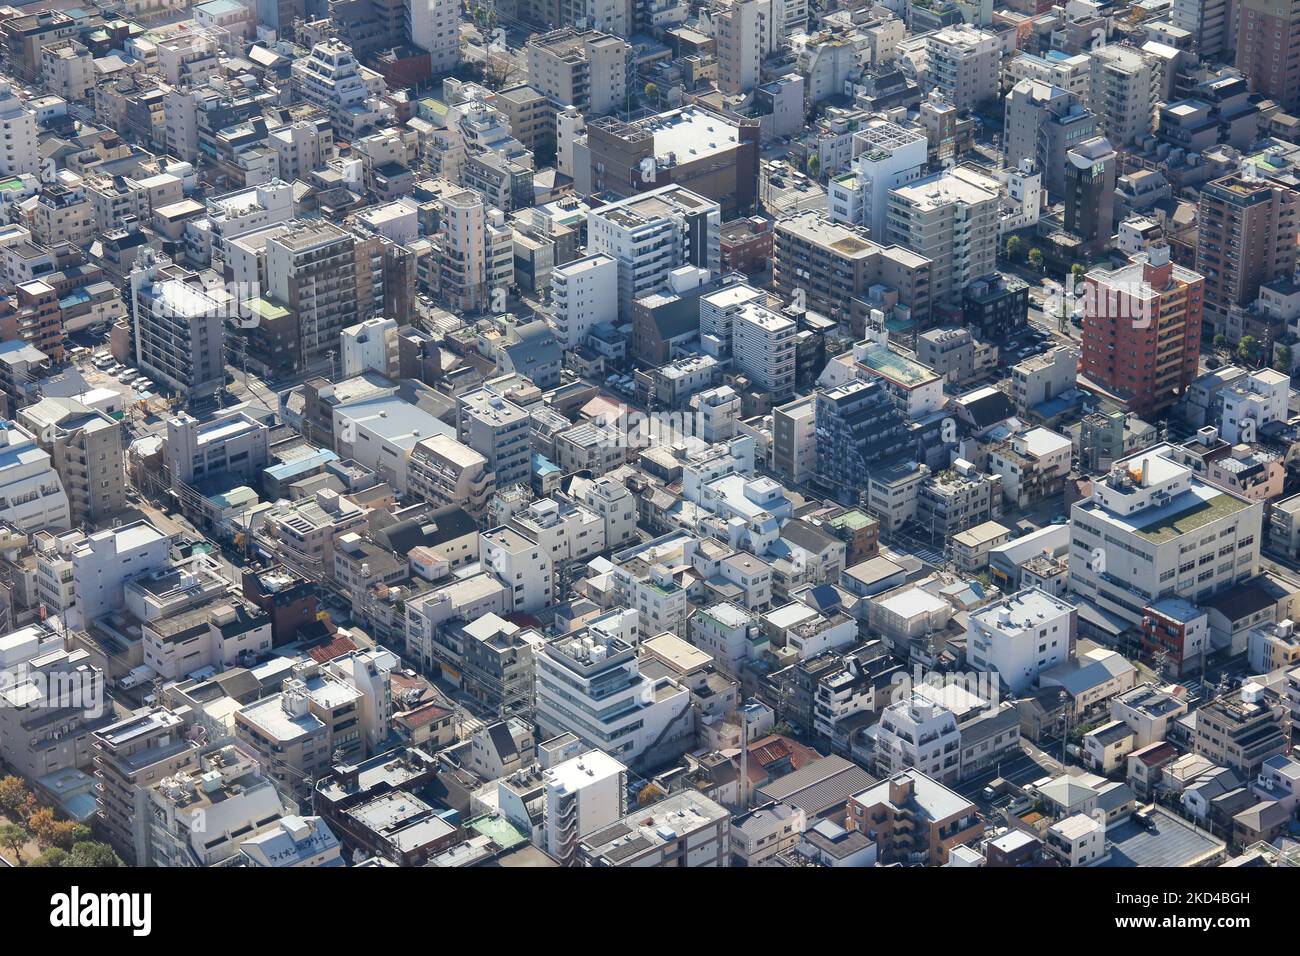 An areal image of a tightly built residential area of Tokyo Stock Photo